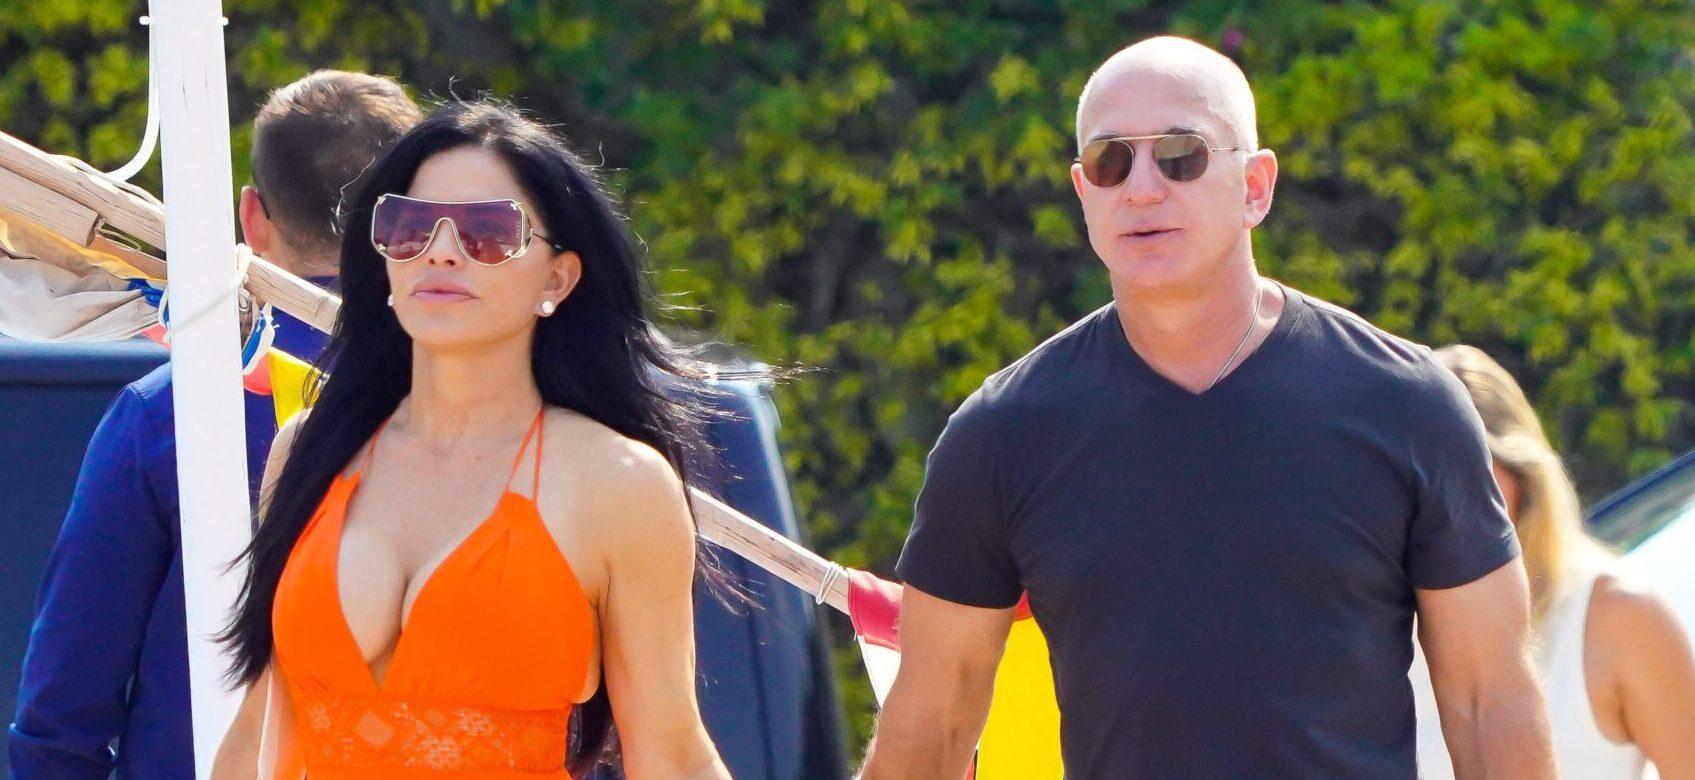 Lauren Sanchez Stuns In Spicy Leather Dress For Date Night After PDA With Jeff Bezos At NYFW